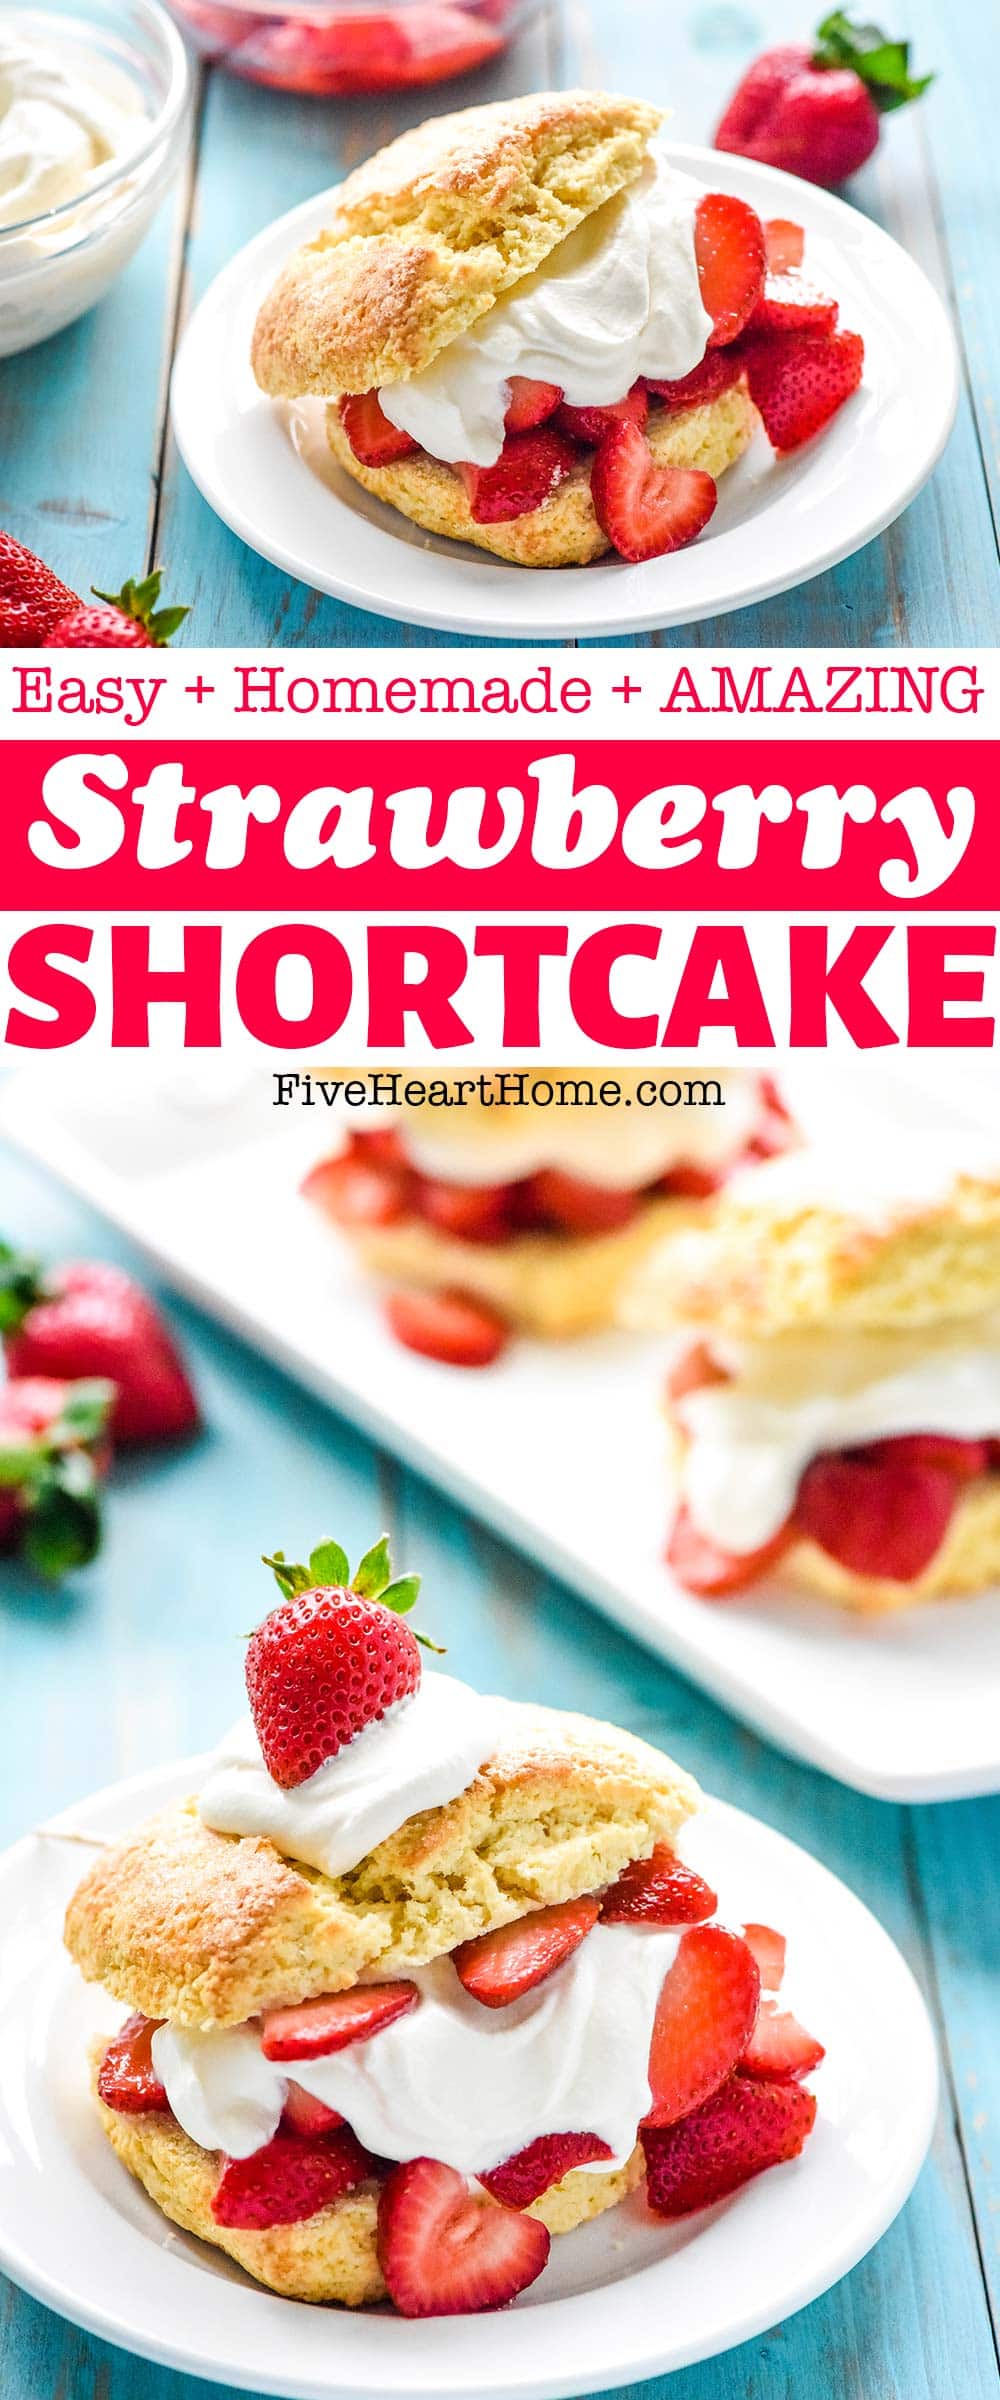 Strawberry Shortcake Recipe ~ this classic strawberry shortcake is surprisingly easy to make homemade. It’s as scrumptious as it is impressive and truly the BEST…you'll never wonder how to make strawberry shortcake again! | FiveHeartHome.com via @fivehearthome